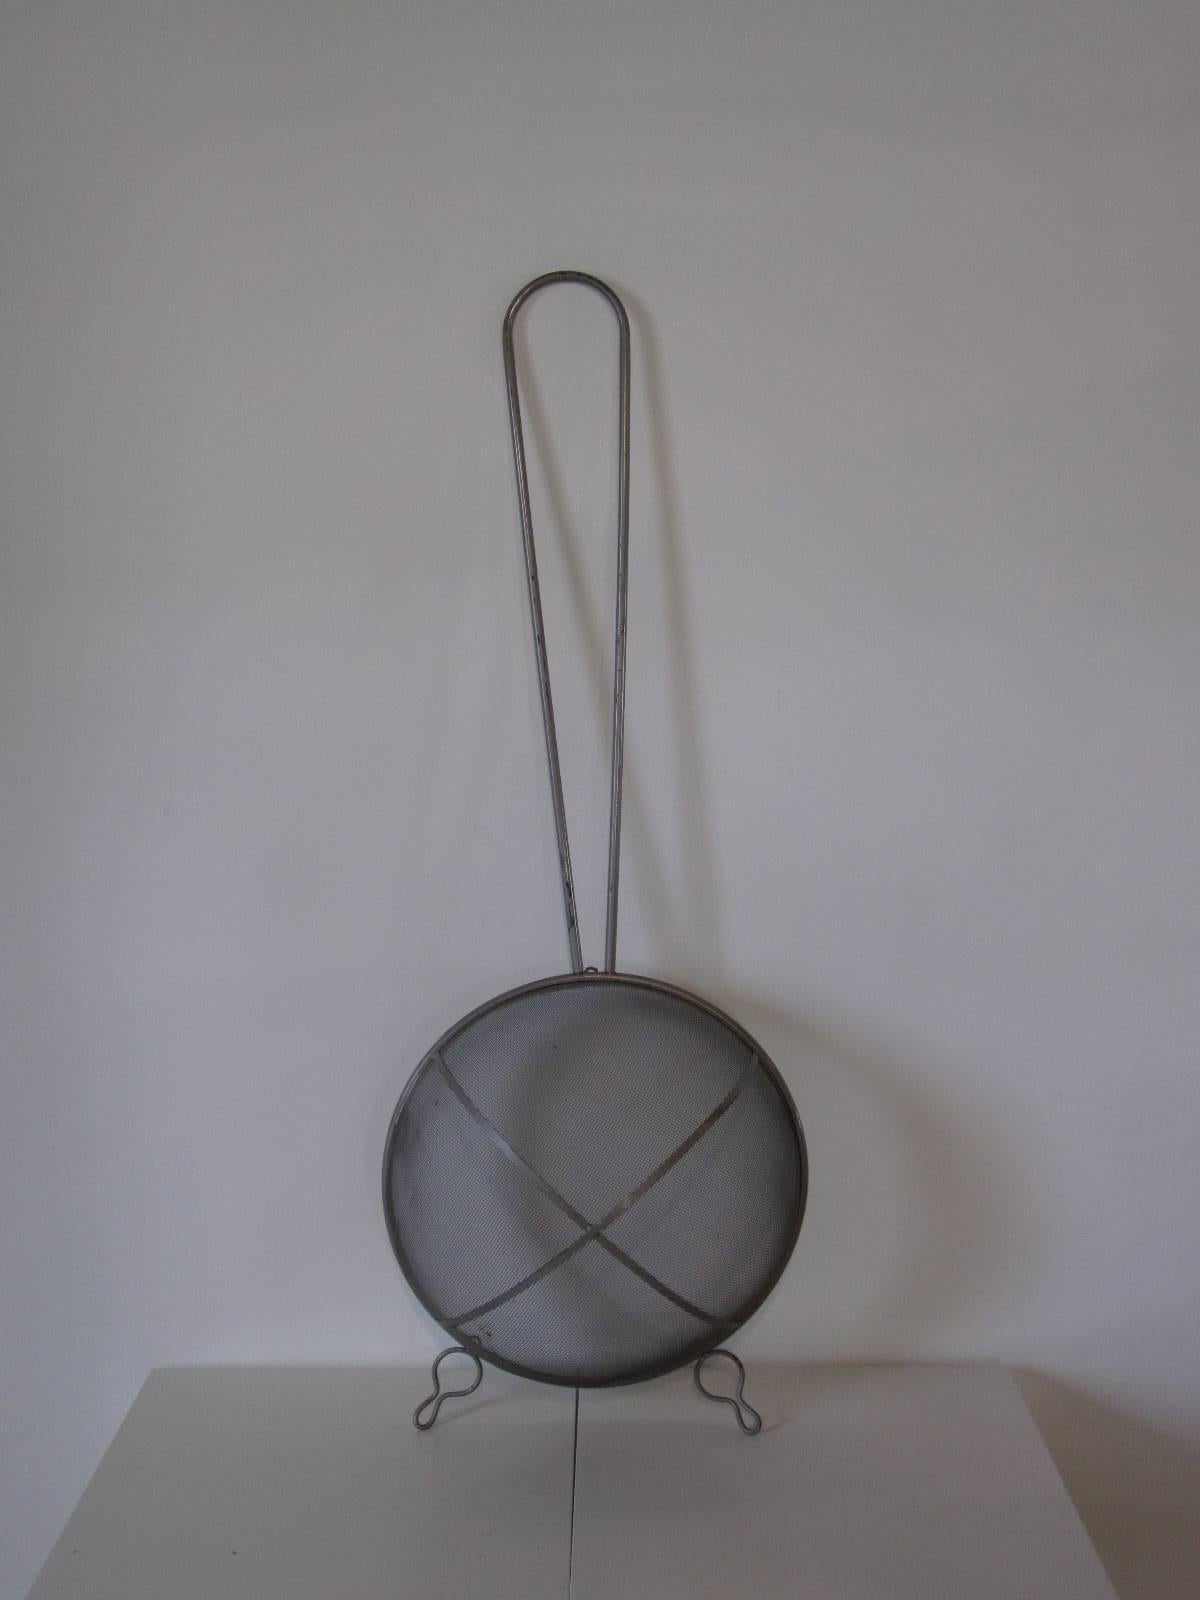 A set of three huge oversized kitchen utensils consisting of a whisk, strainer and a slotted spoon. Welded and formed in metal with a light metal toned paint finish ready to hang in that restaurant or large kitchen. Hanging brackets are attached to